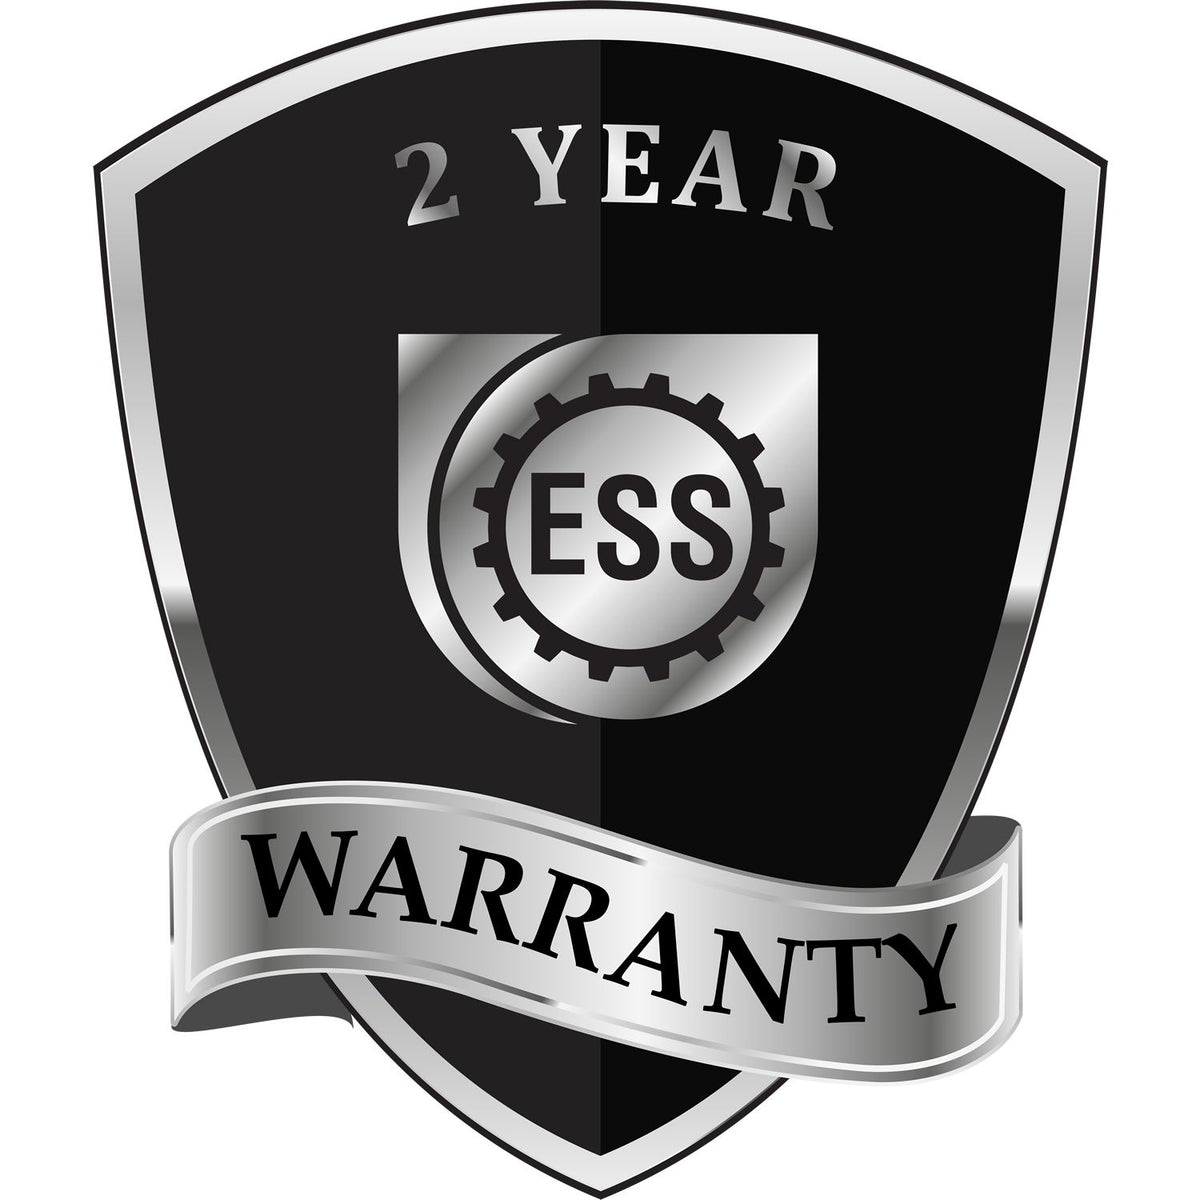 A badge or emblem showing a warranty icon for the Handheld Colorado Land Surveyor Seal